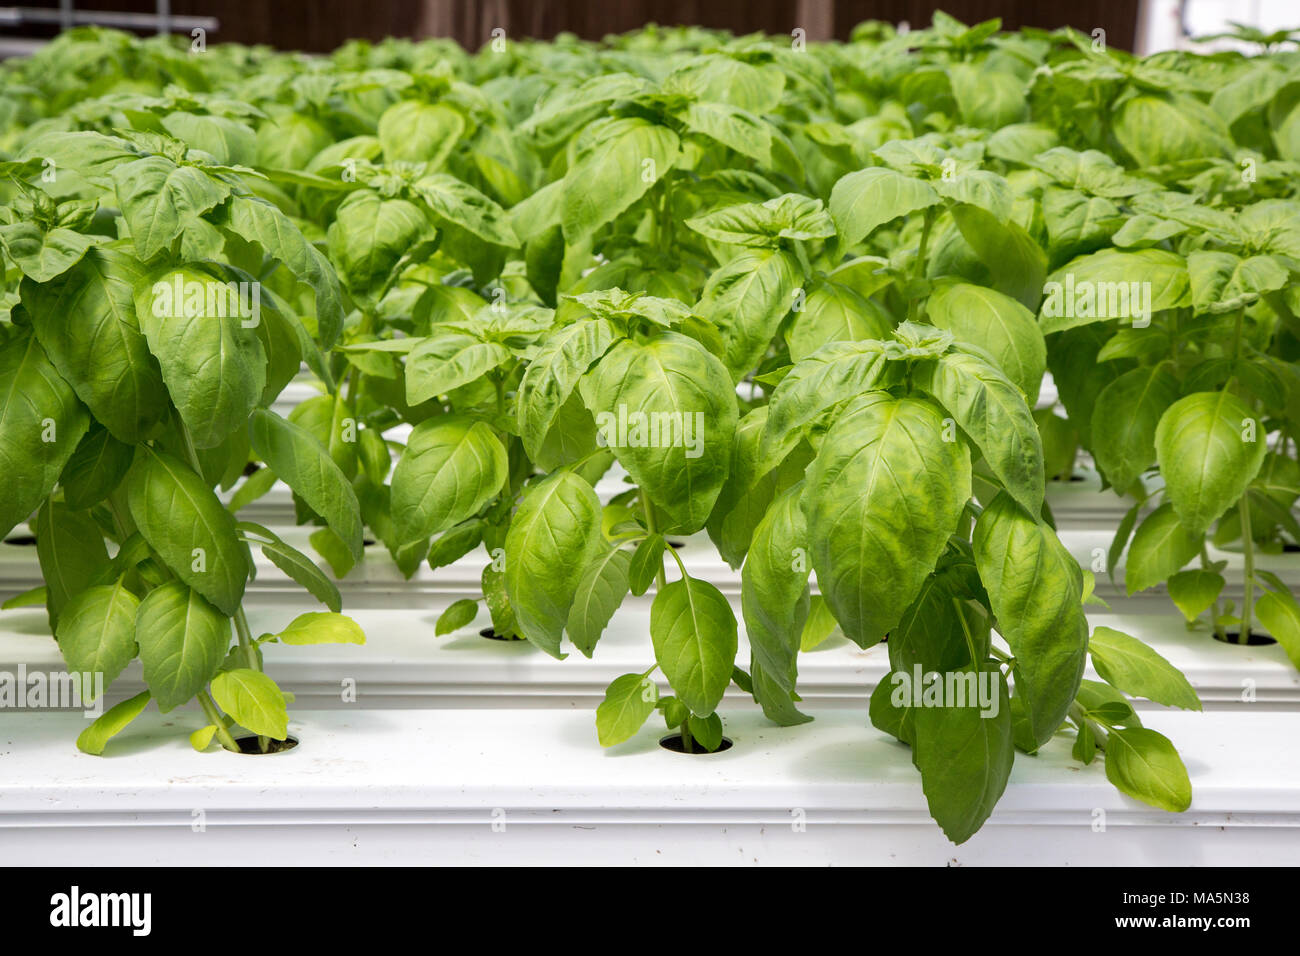 Hydroponic Agriculture, Cultivation of Basil.  Dyersville, Iowa, USA. Stock Photo